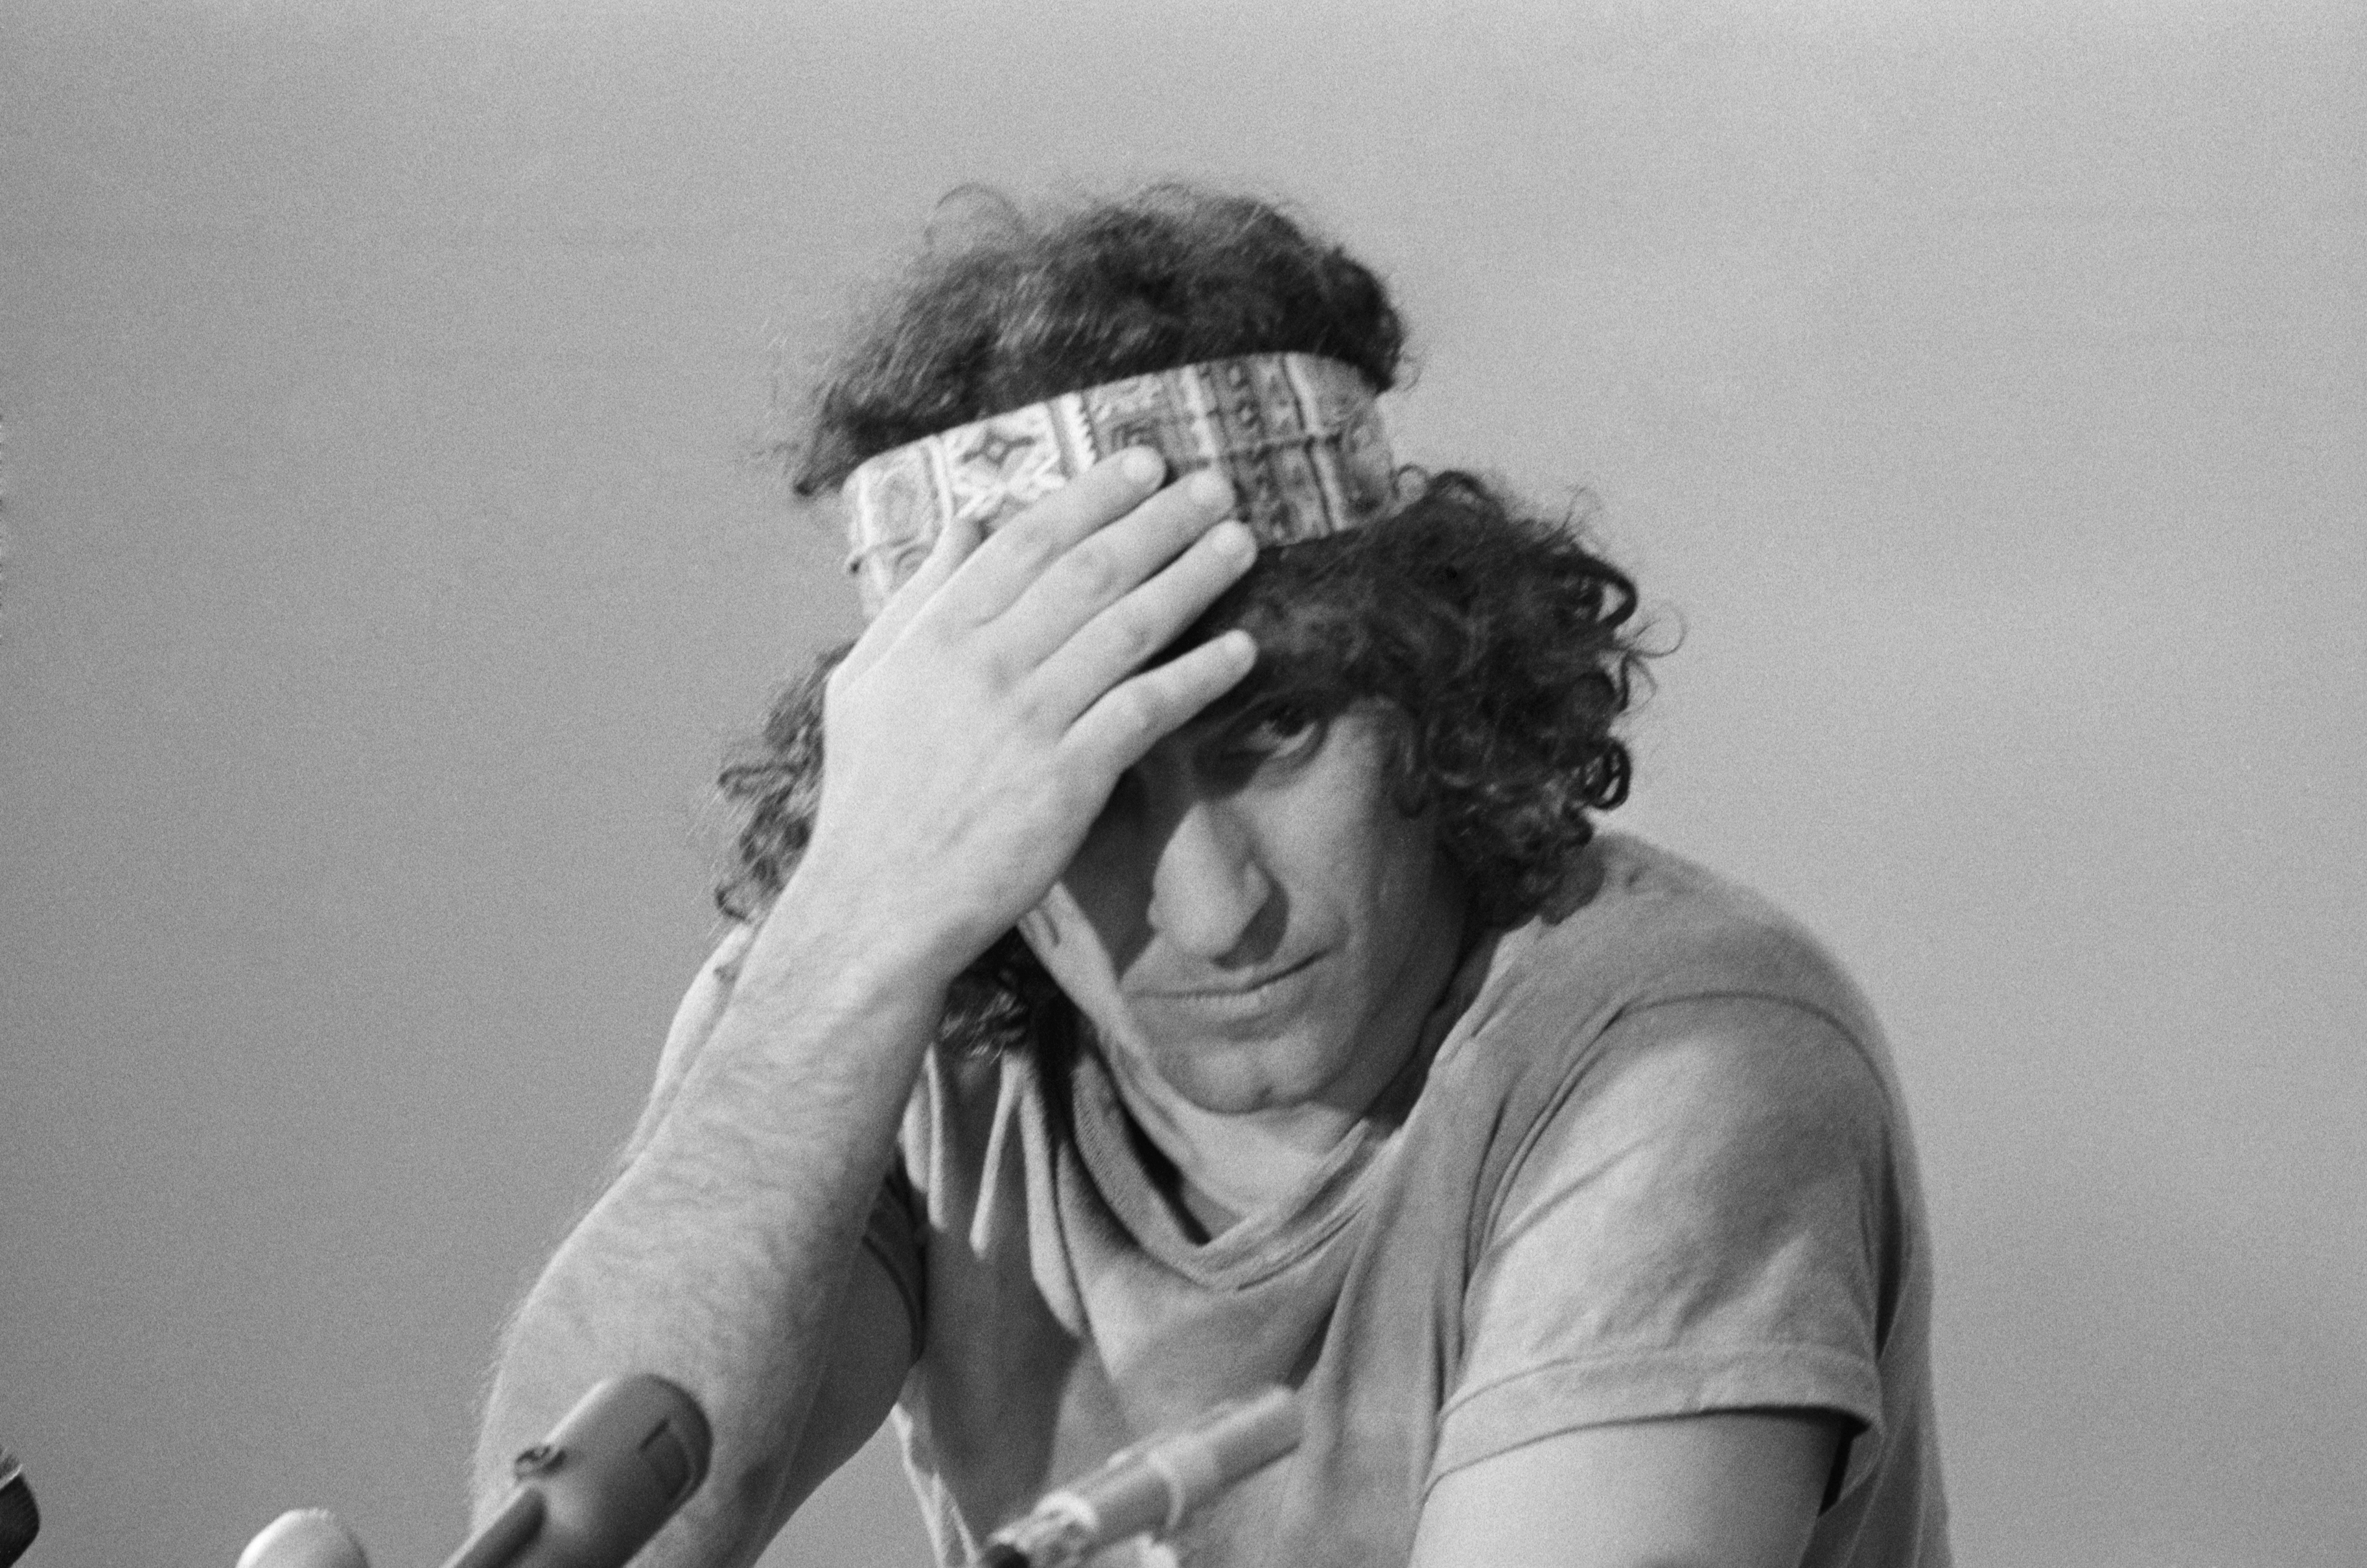 Abbie Hoffman adjusts his headband during a news conference about the trial (Bettmann Archive)